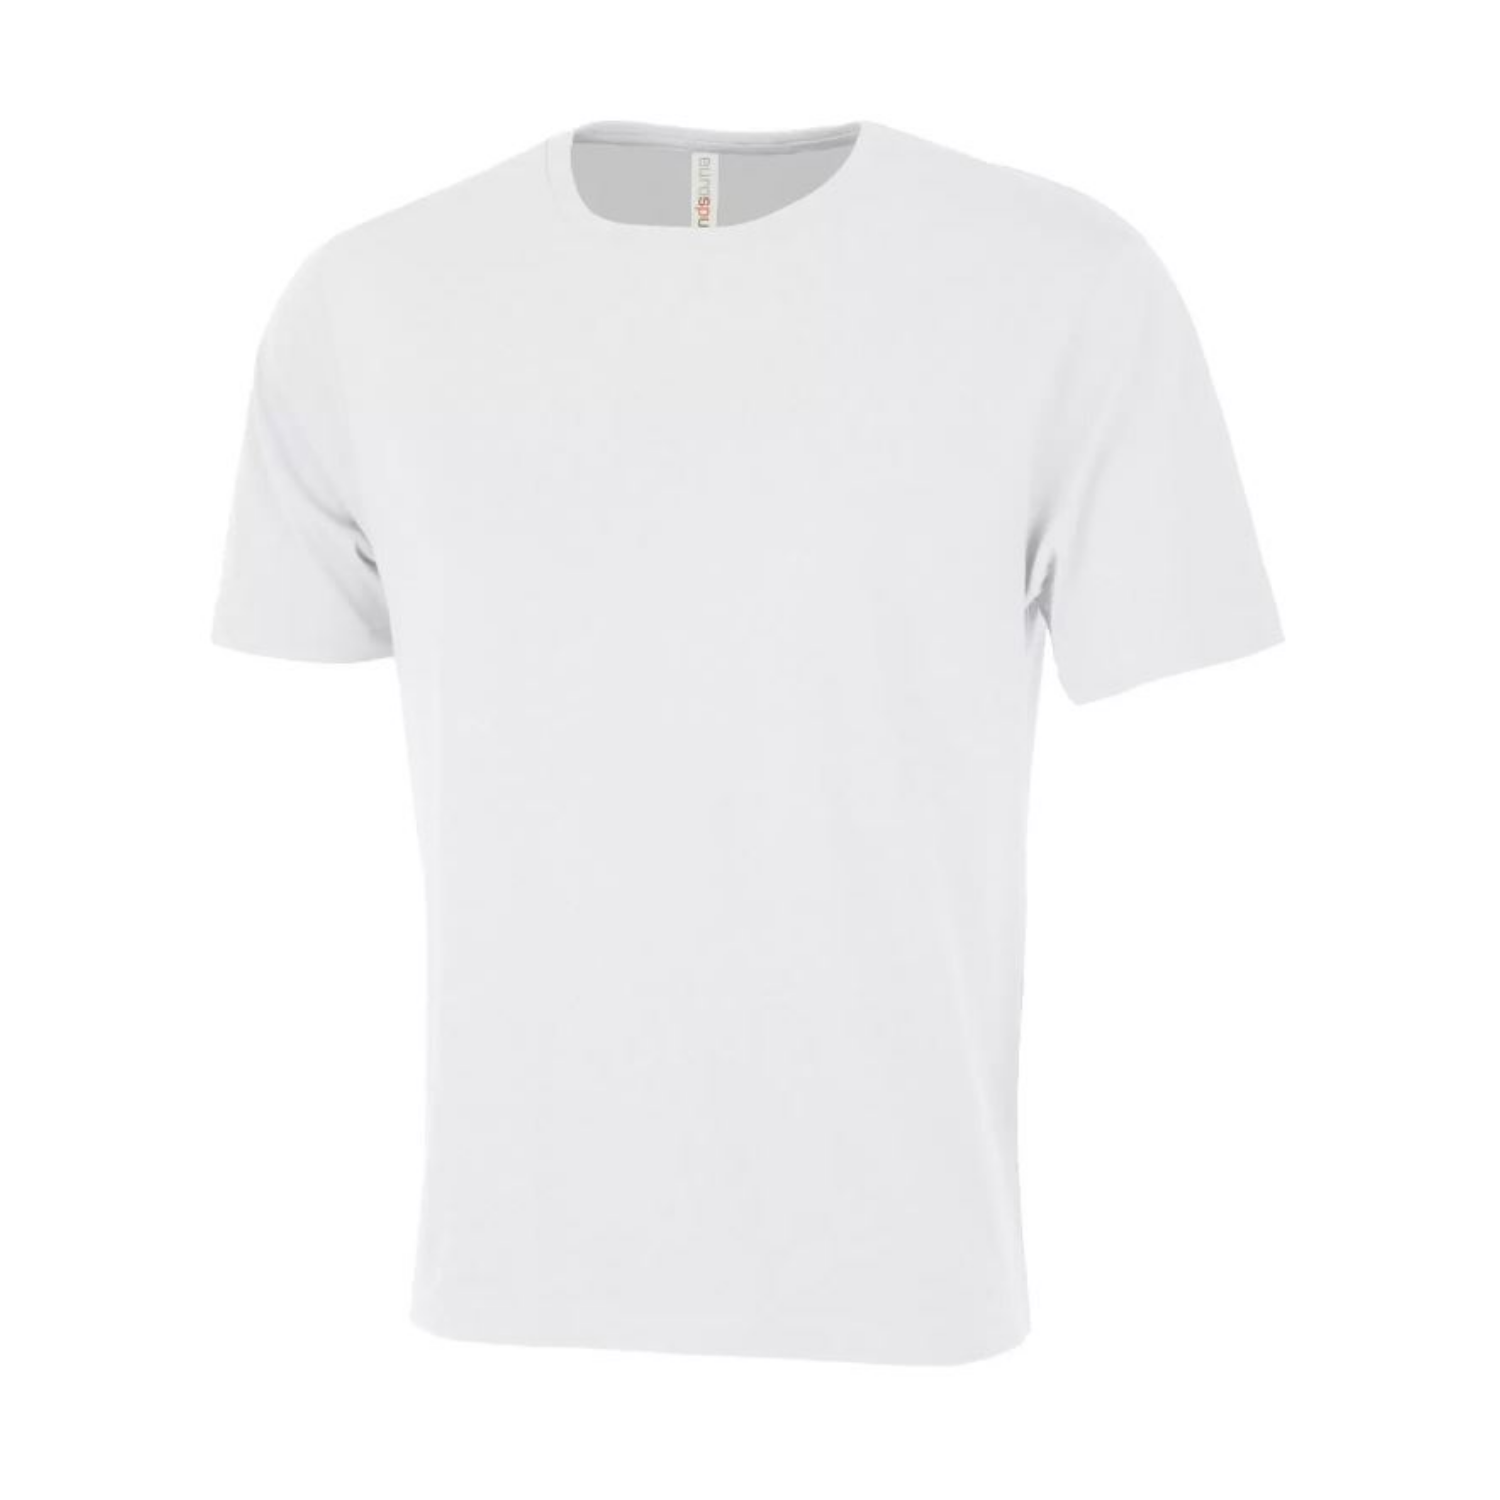 A blank white shirt ready to be full color printed.